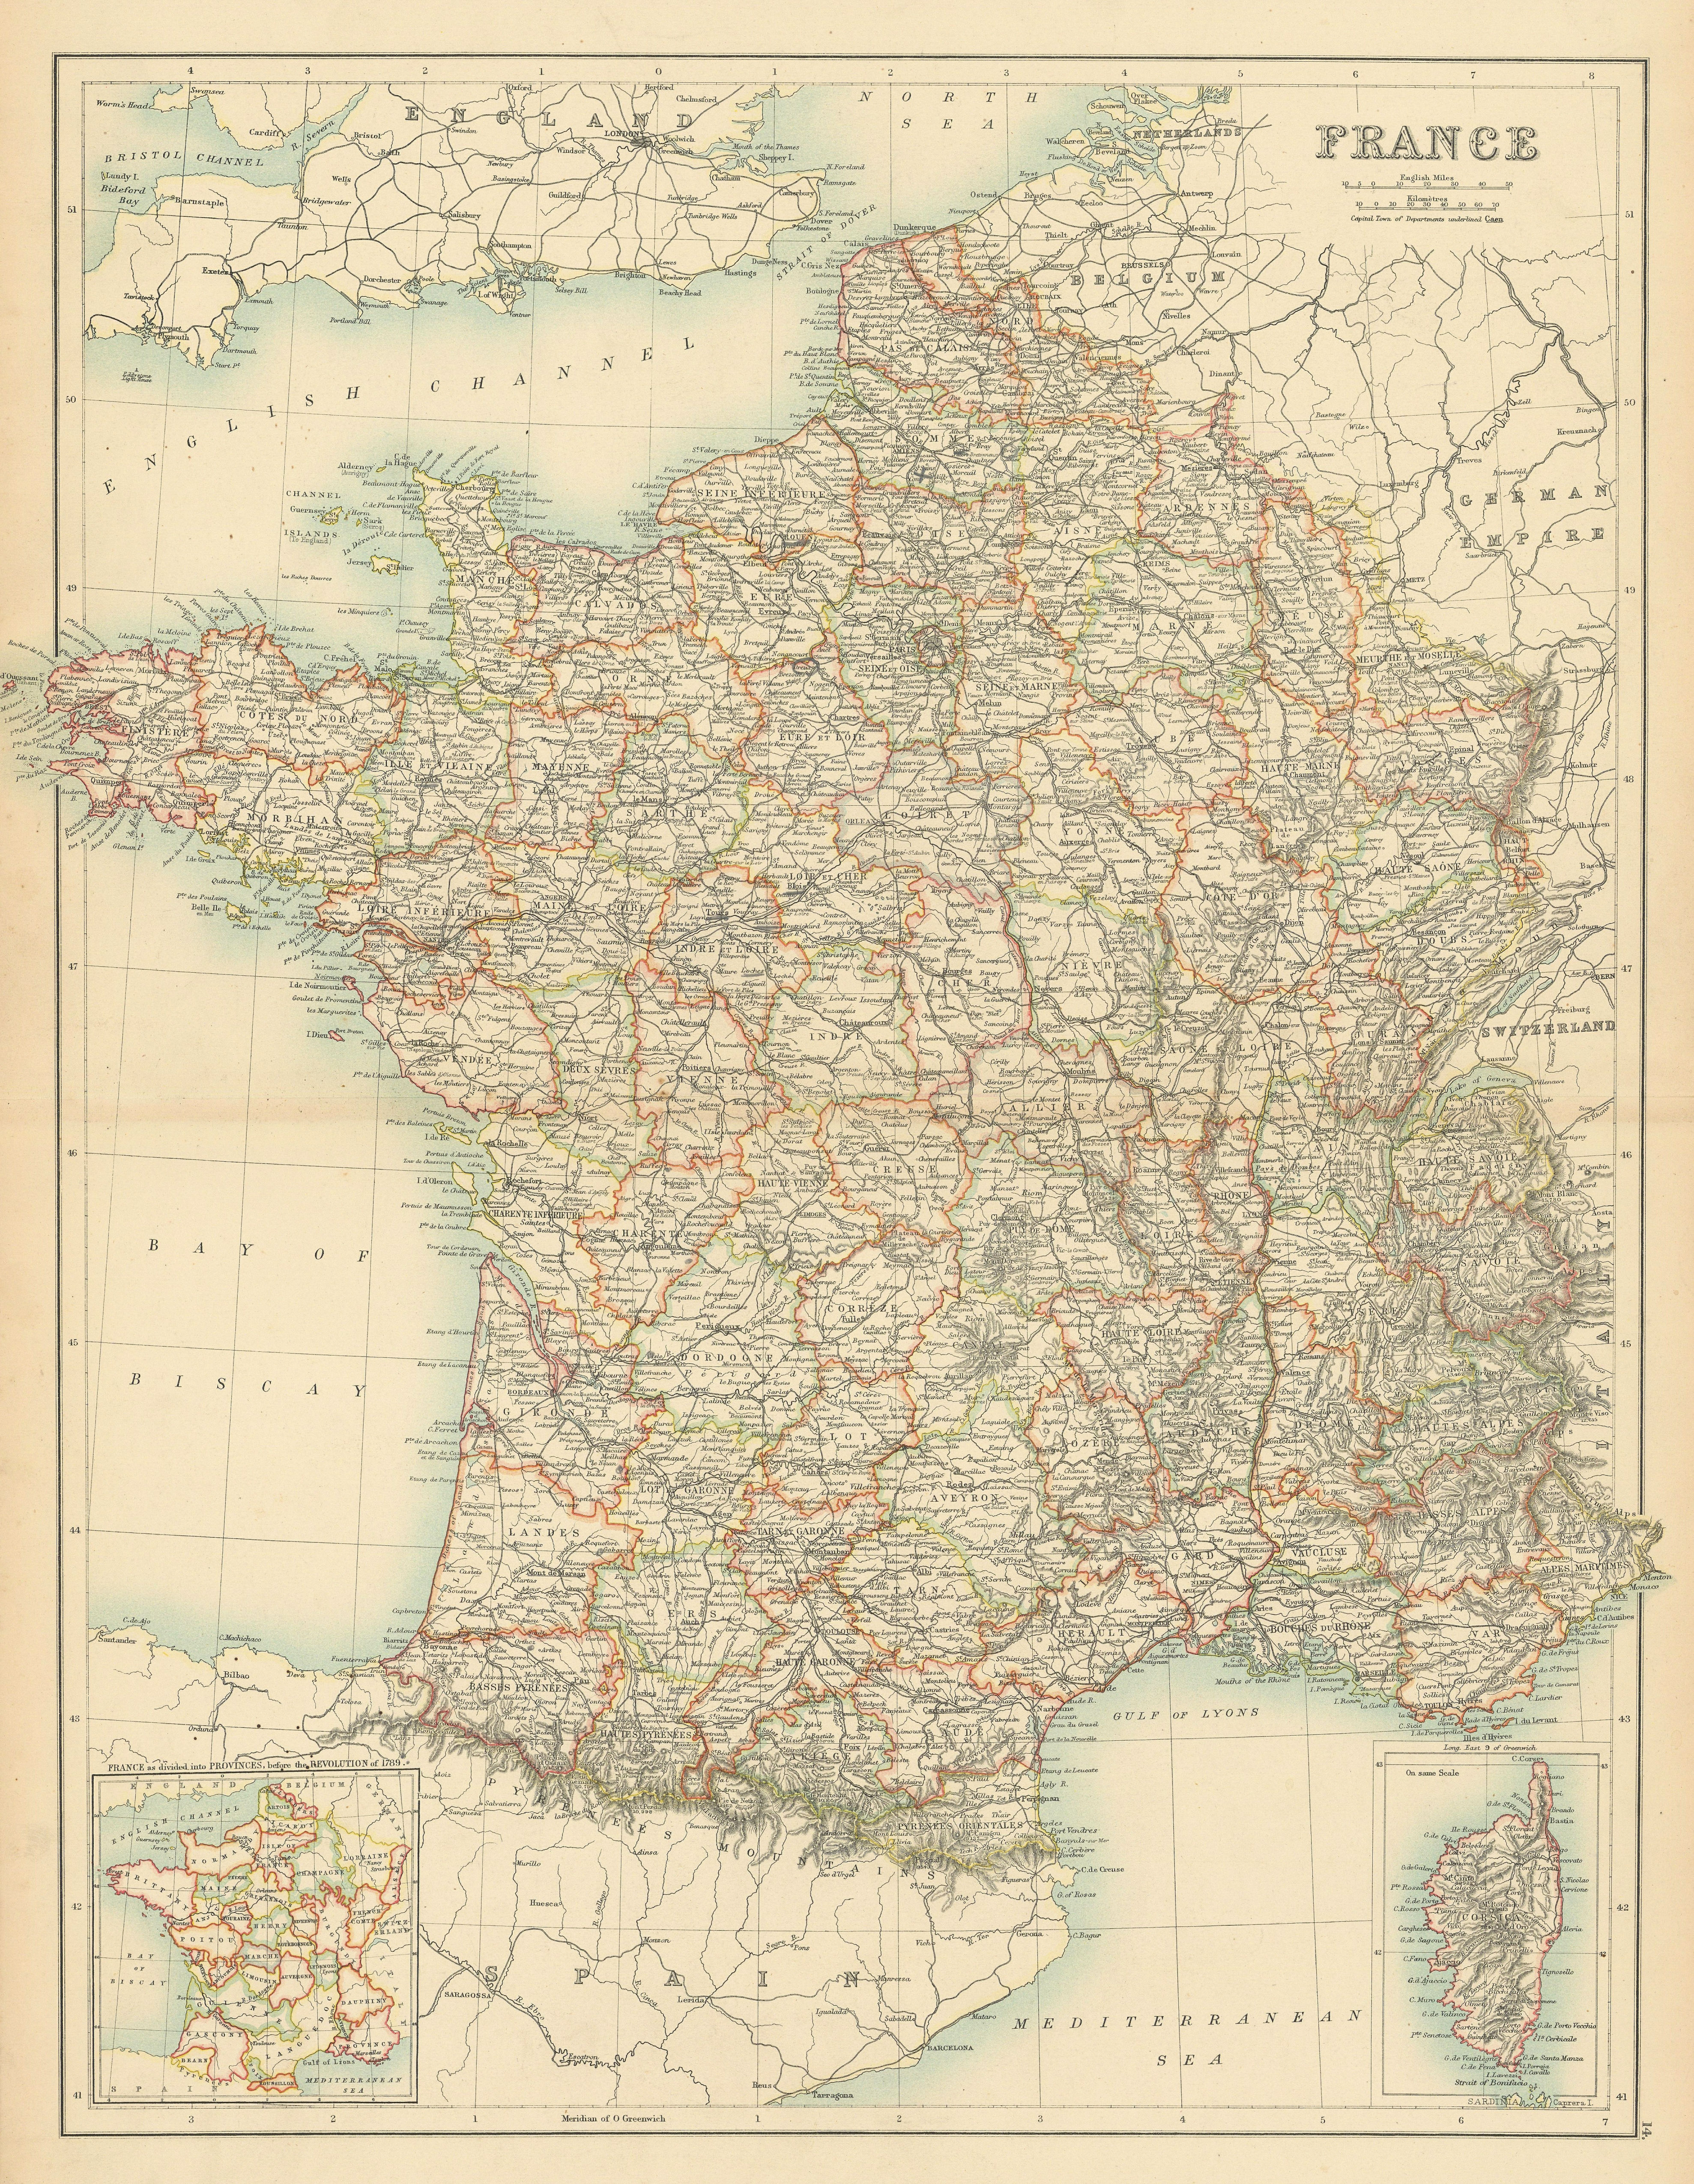 Associate Product France without Alsace Lorraine. Departements. BARTHOLOMEW 1898 old antique map